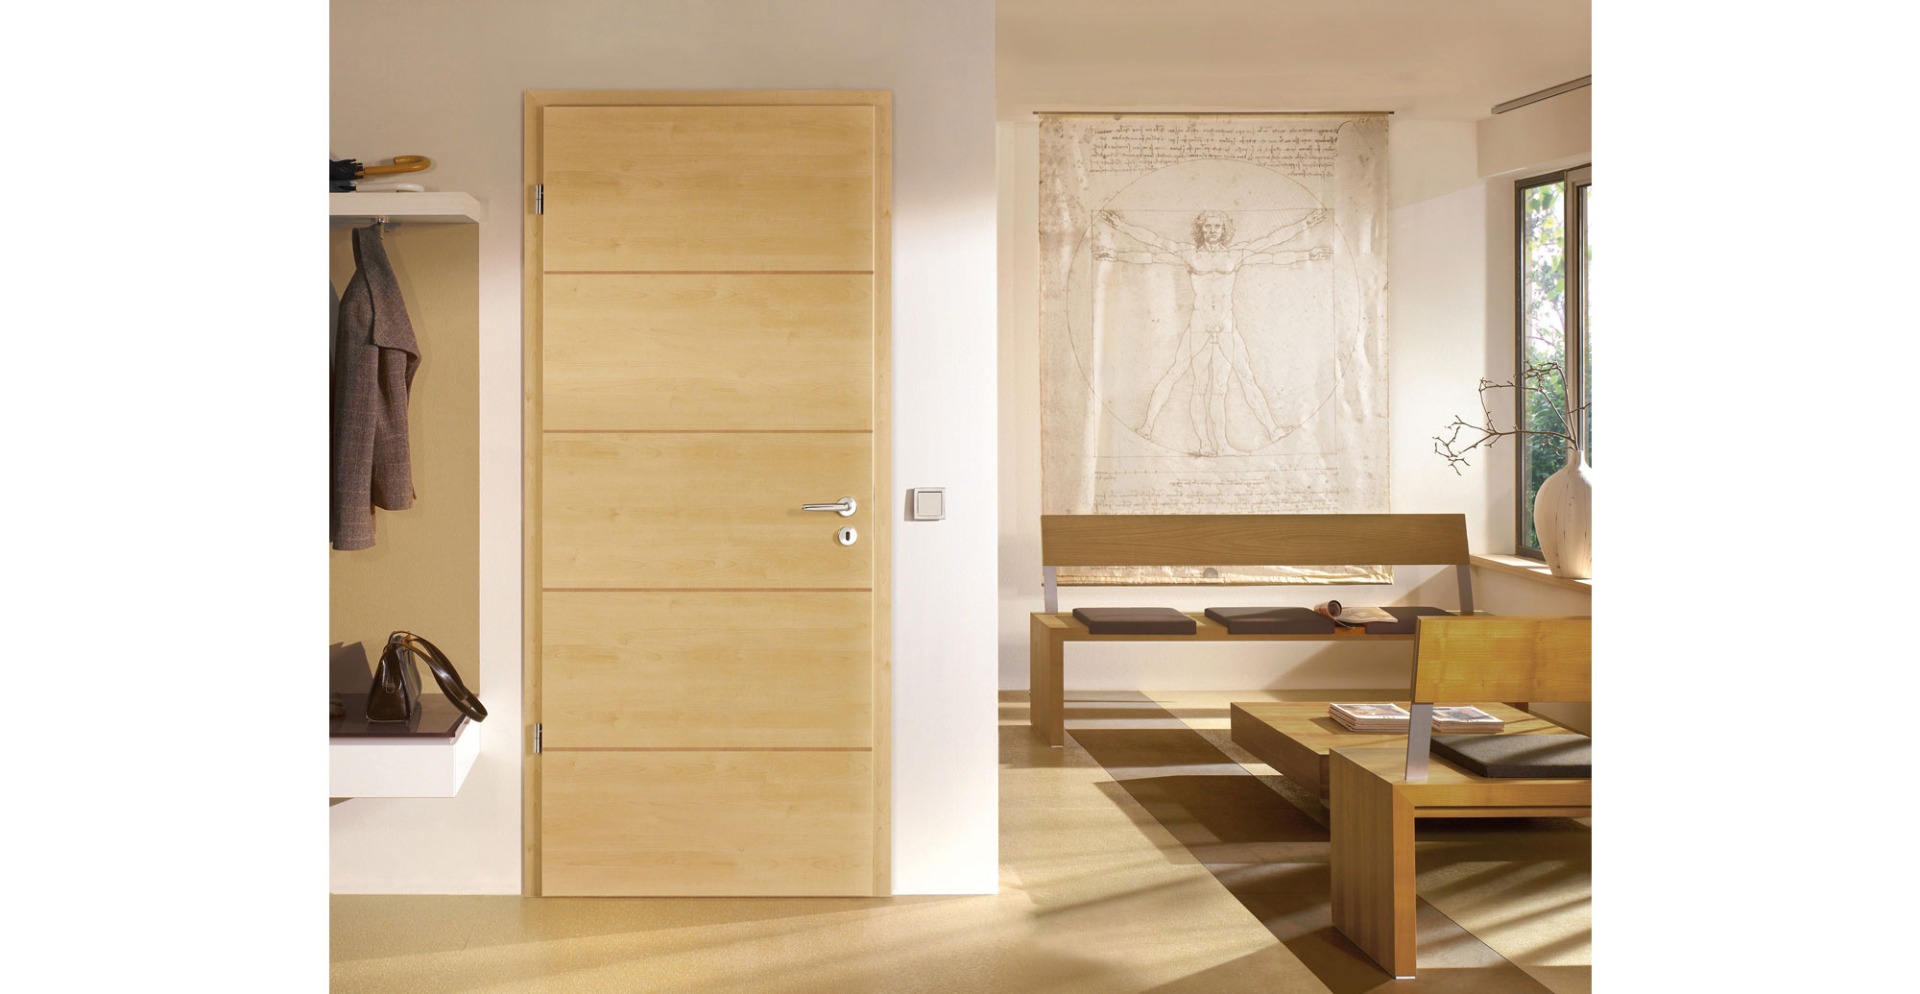 Maple Doors - Bespoke fire doors are a great choice for any home